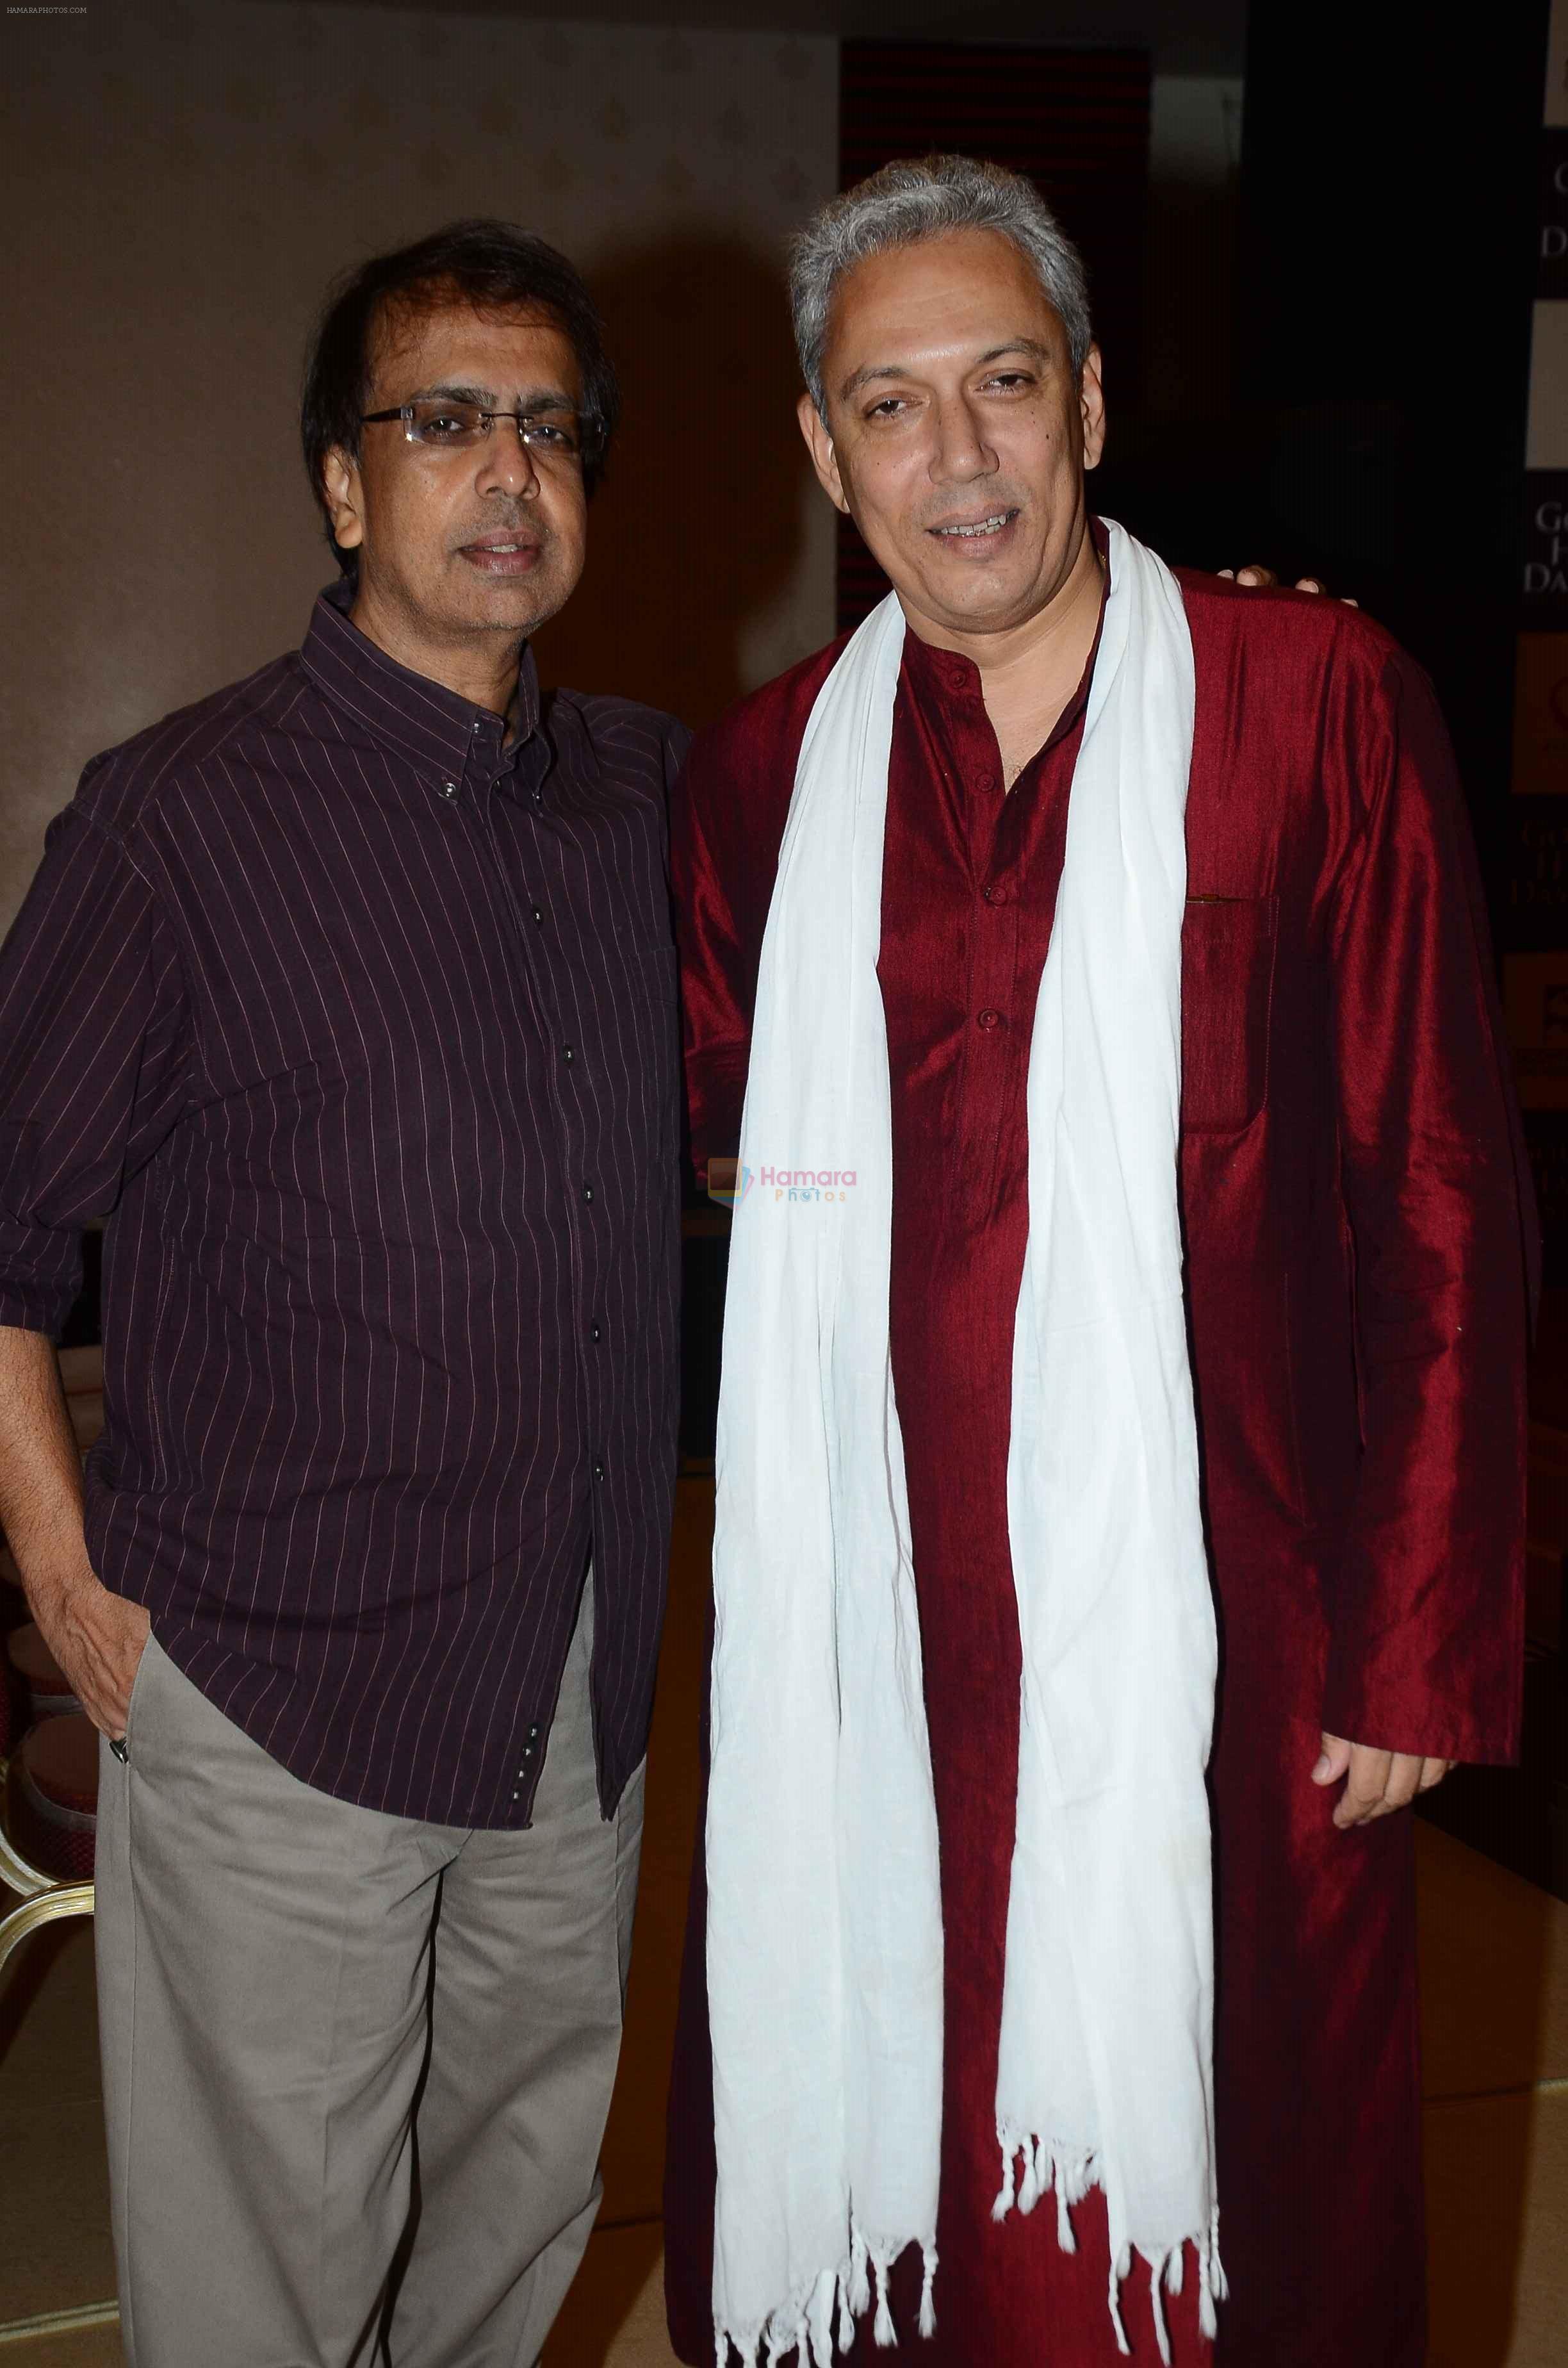 Anant Mahadevan at the music launch of Gour Hari Dastaan on 31st July 2015